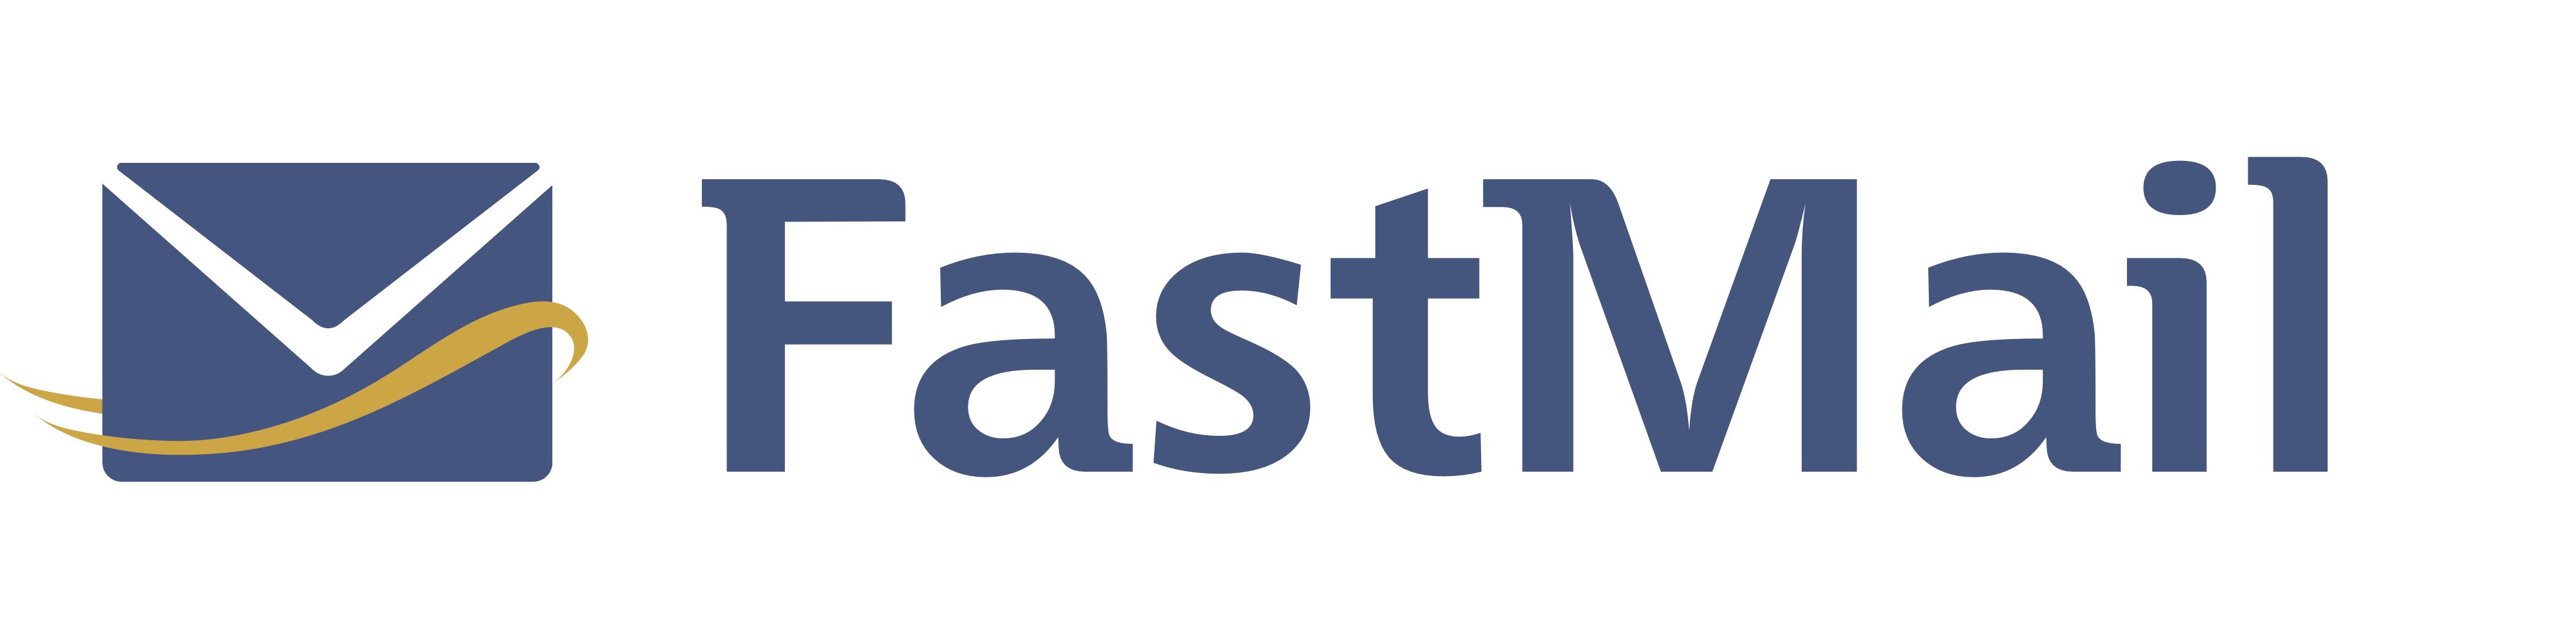 Fastmail Logo - Fastmail: A Gmail Replacement